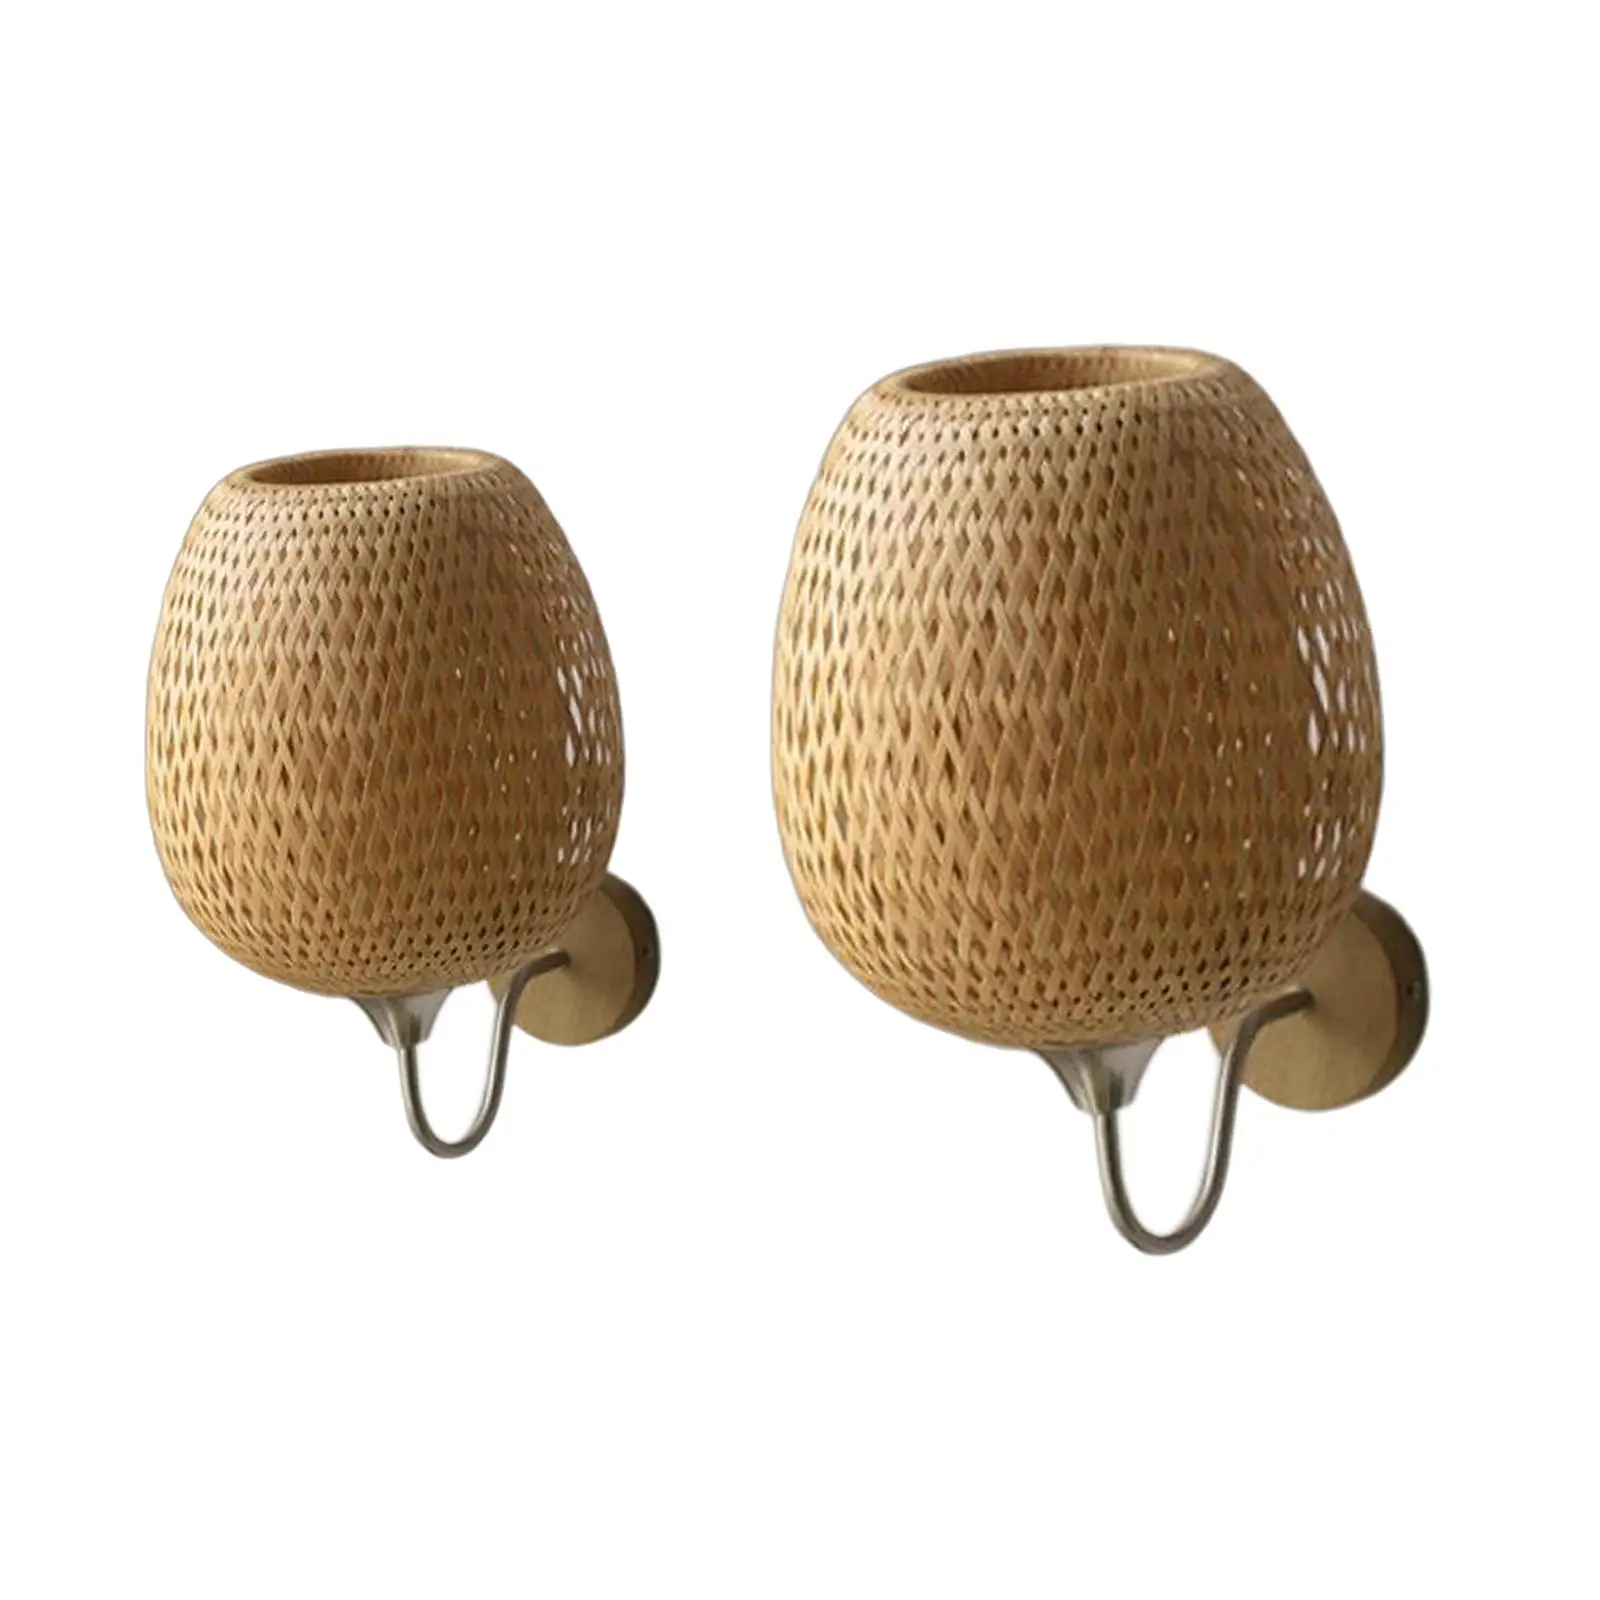 Rattan Wall Sconce Light Fixture Vintage Wall Lamp Lighting Fixture for Living